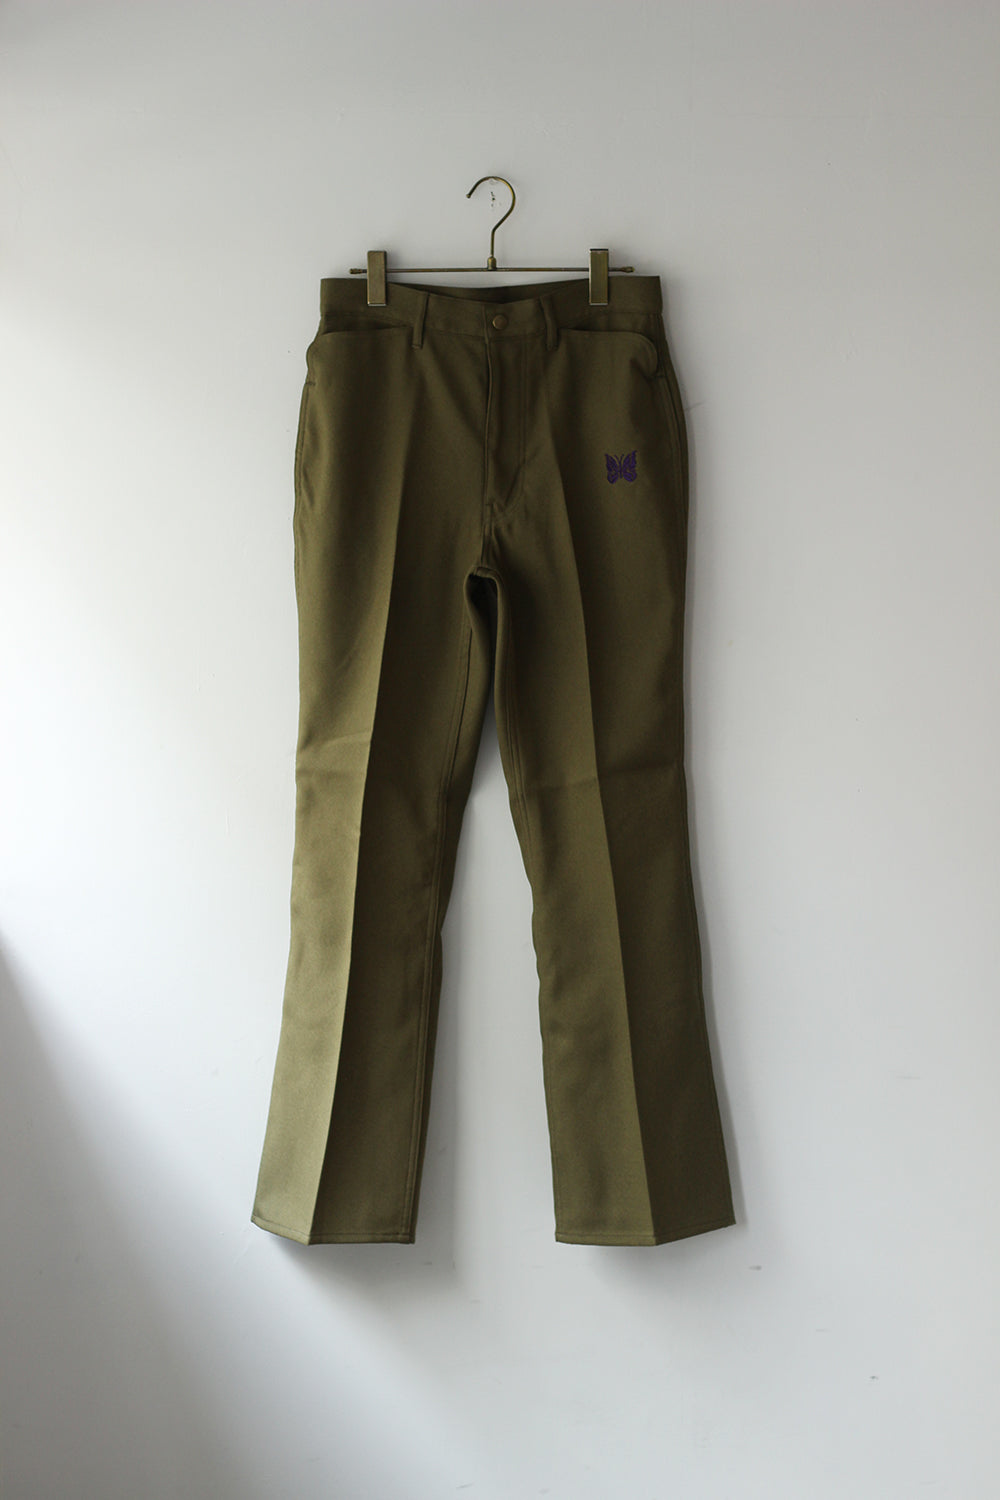 Needles "Boot-Cut Jean - Poly Twill" (olive)